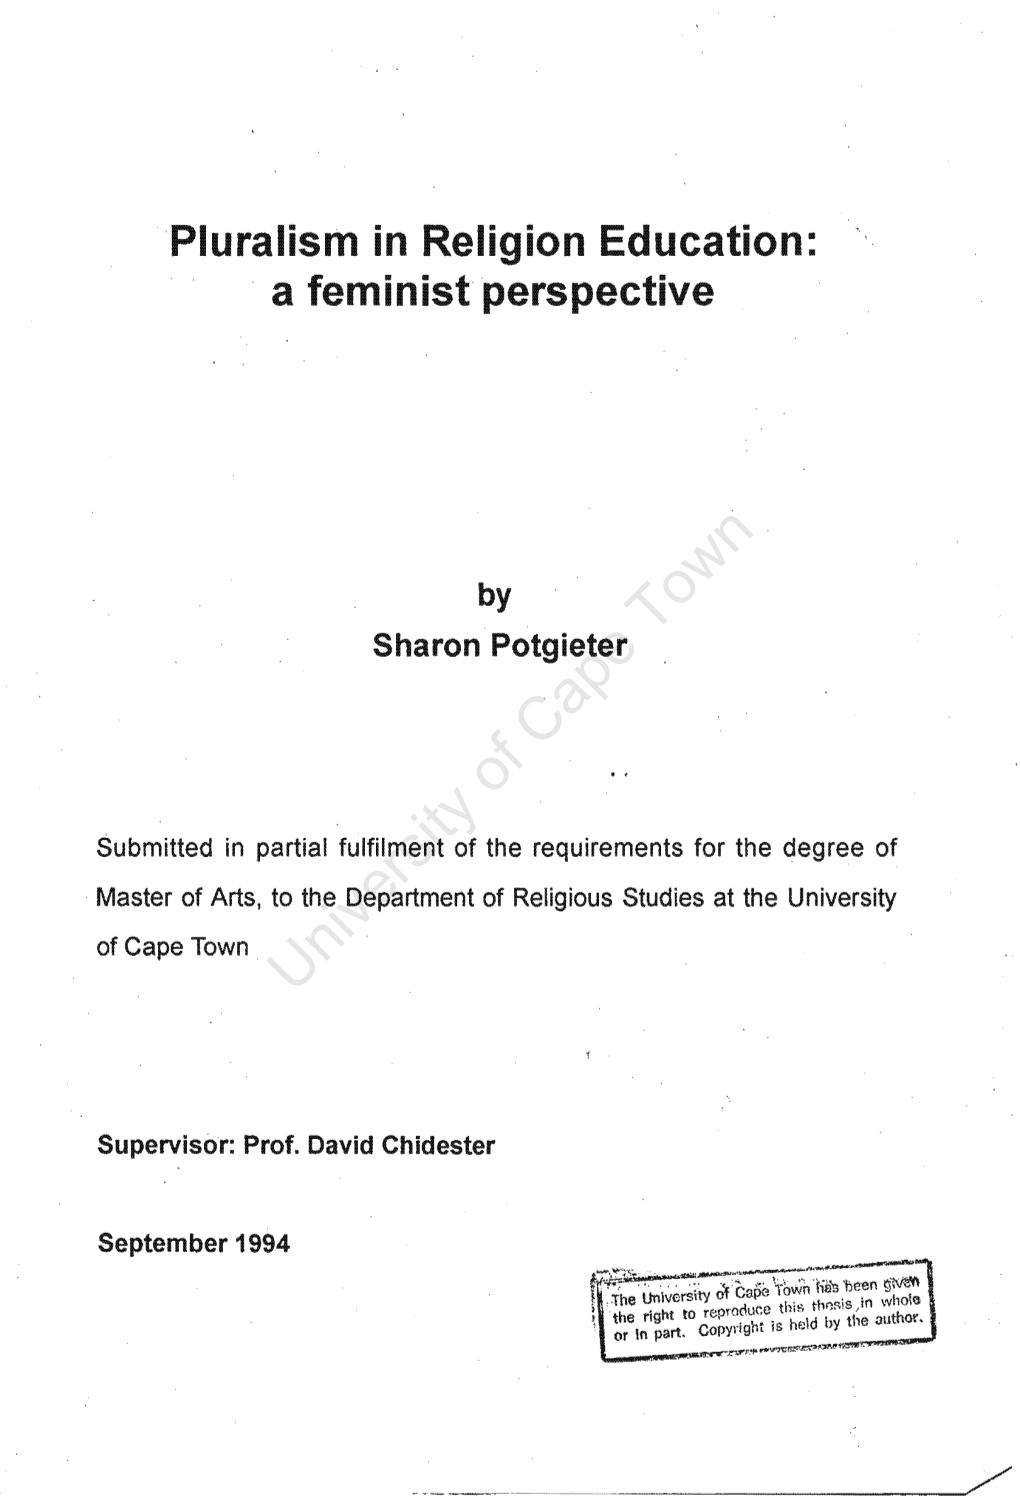 Pluralism in Religion Education: a Feminist Perspective